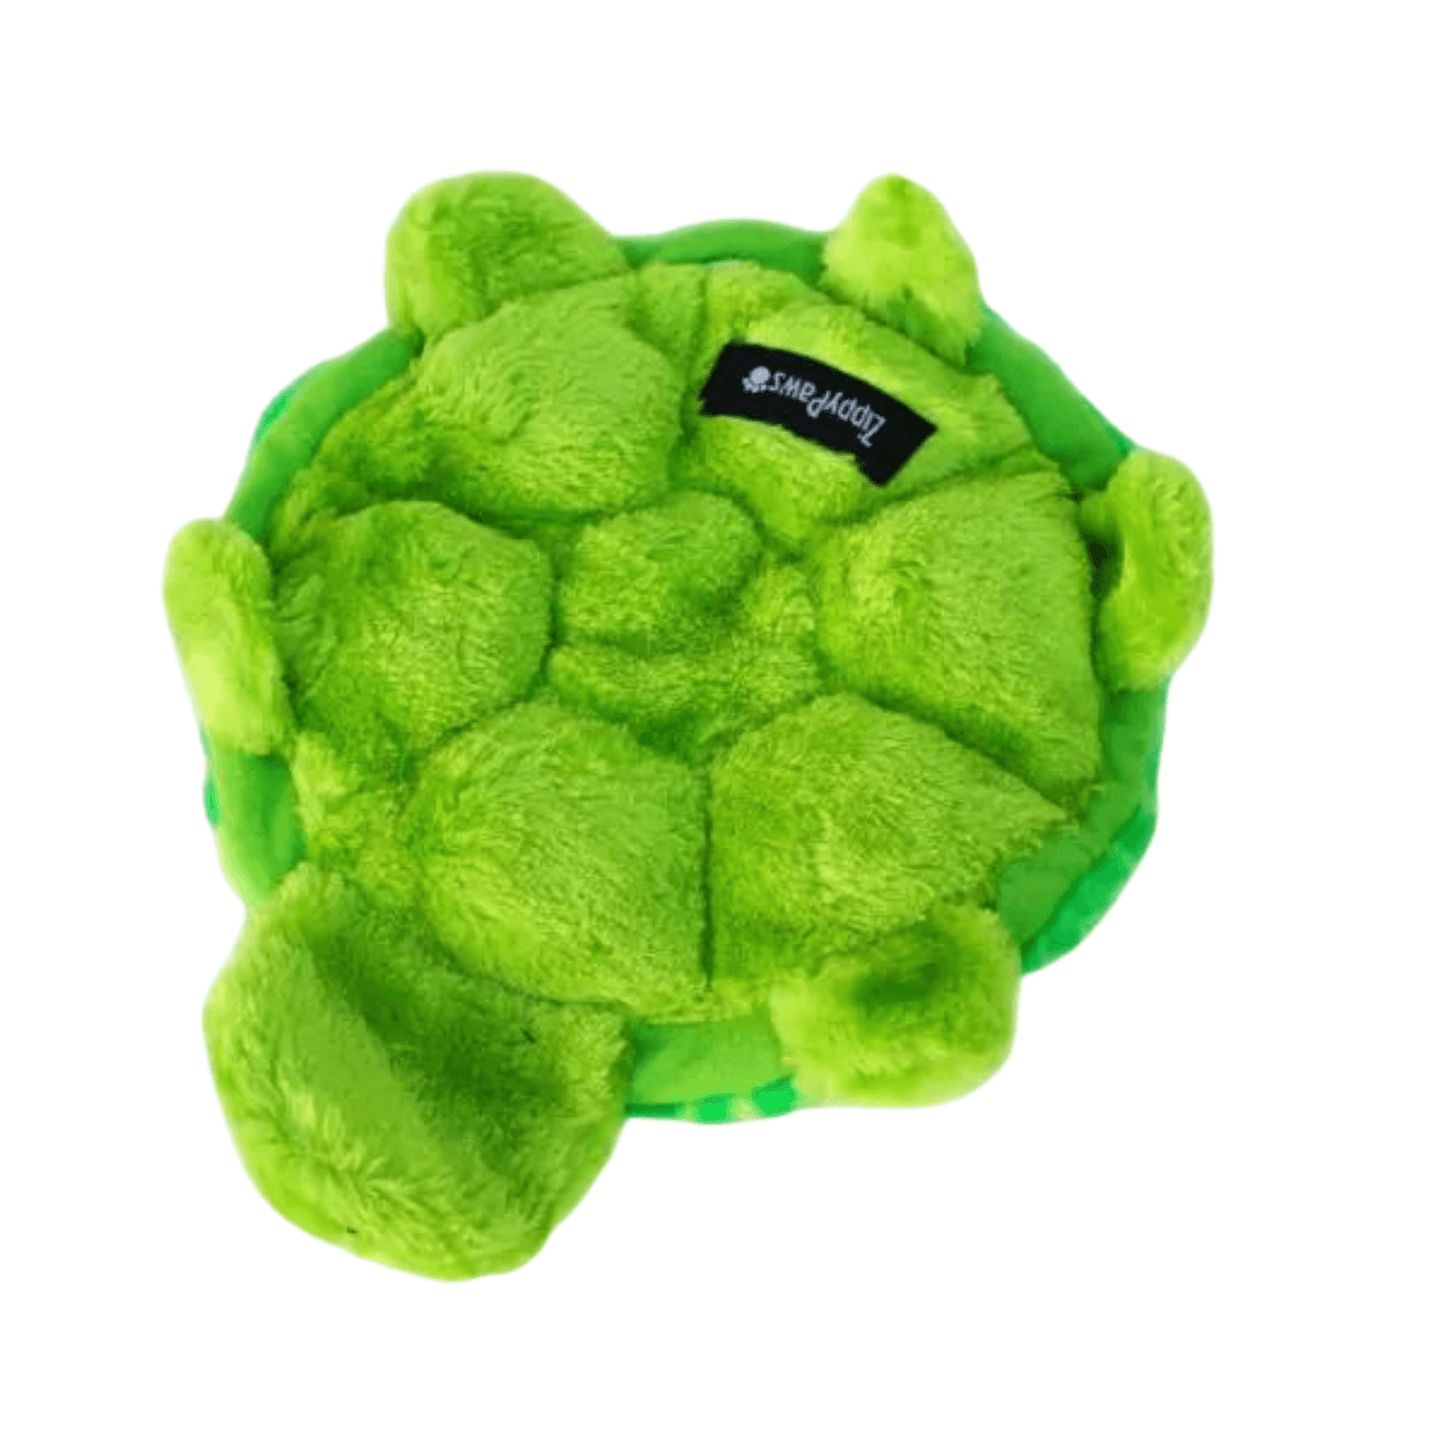 Plush, squeaky turtle dog toy, let's pawty 